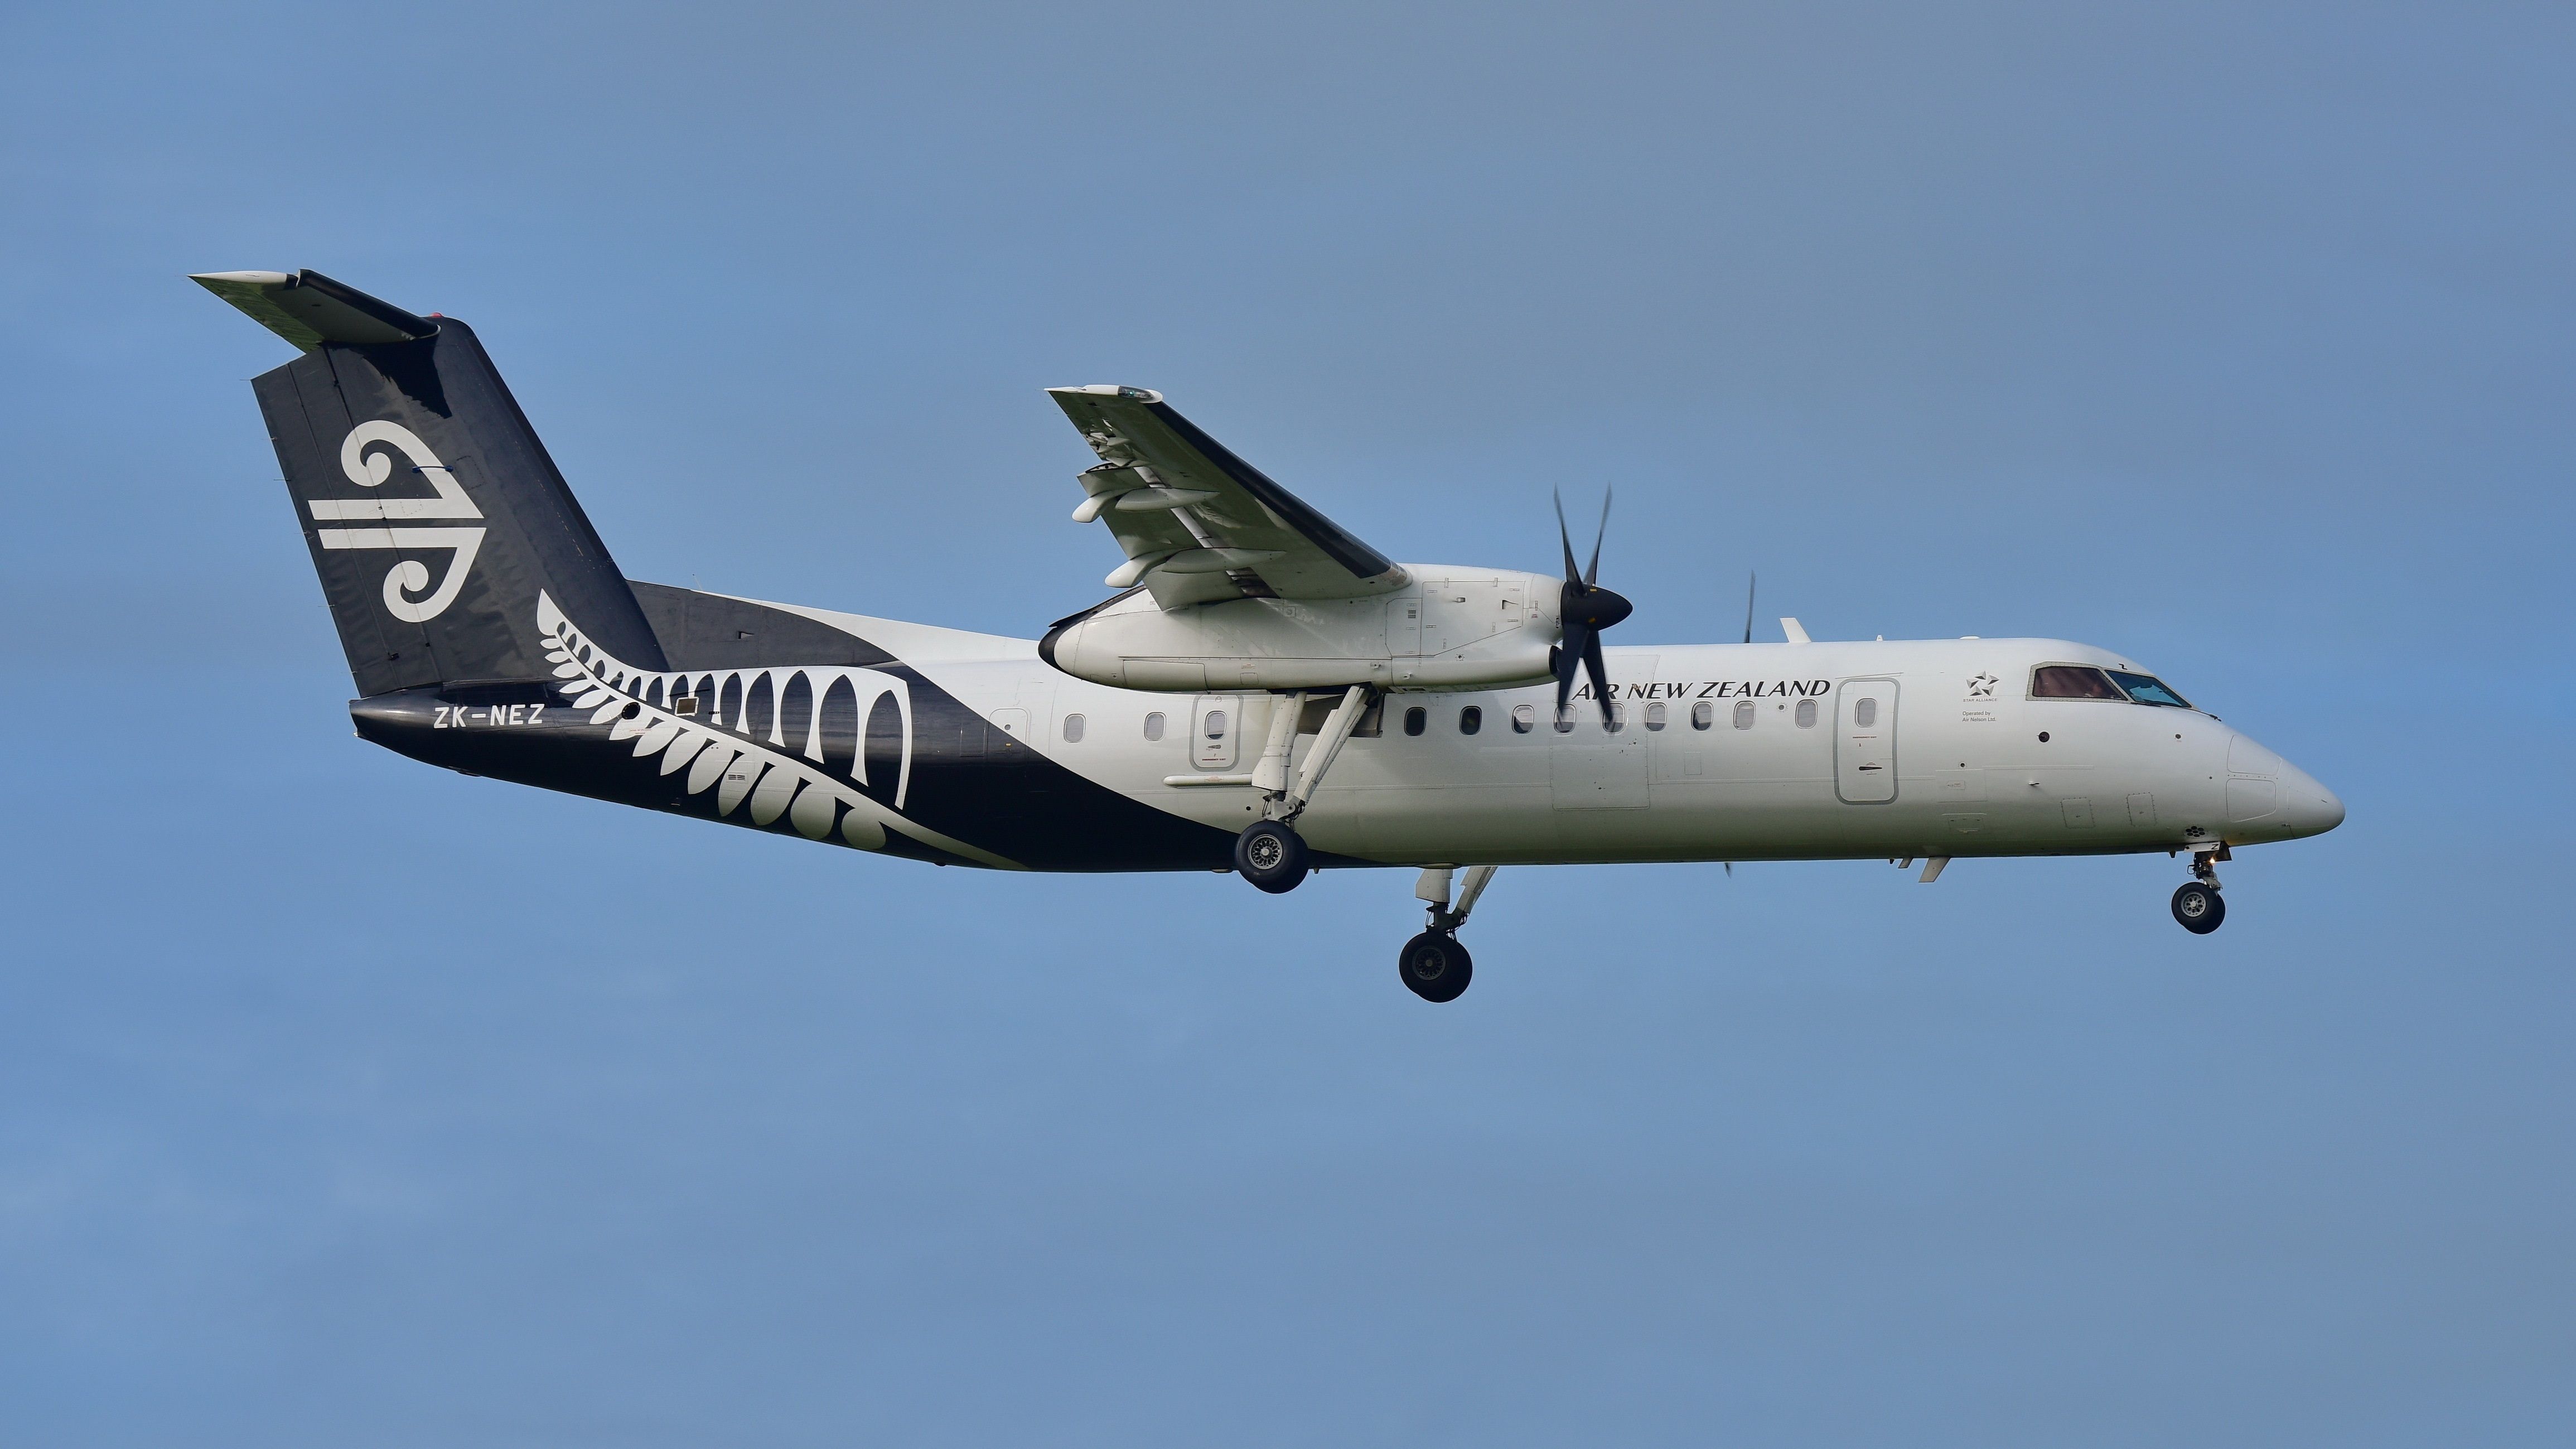 An Air New Zealand Dash 8 Q300 flying in the sky.